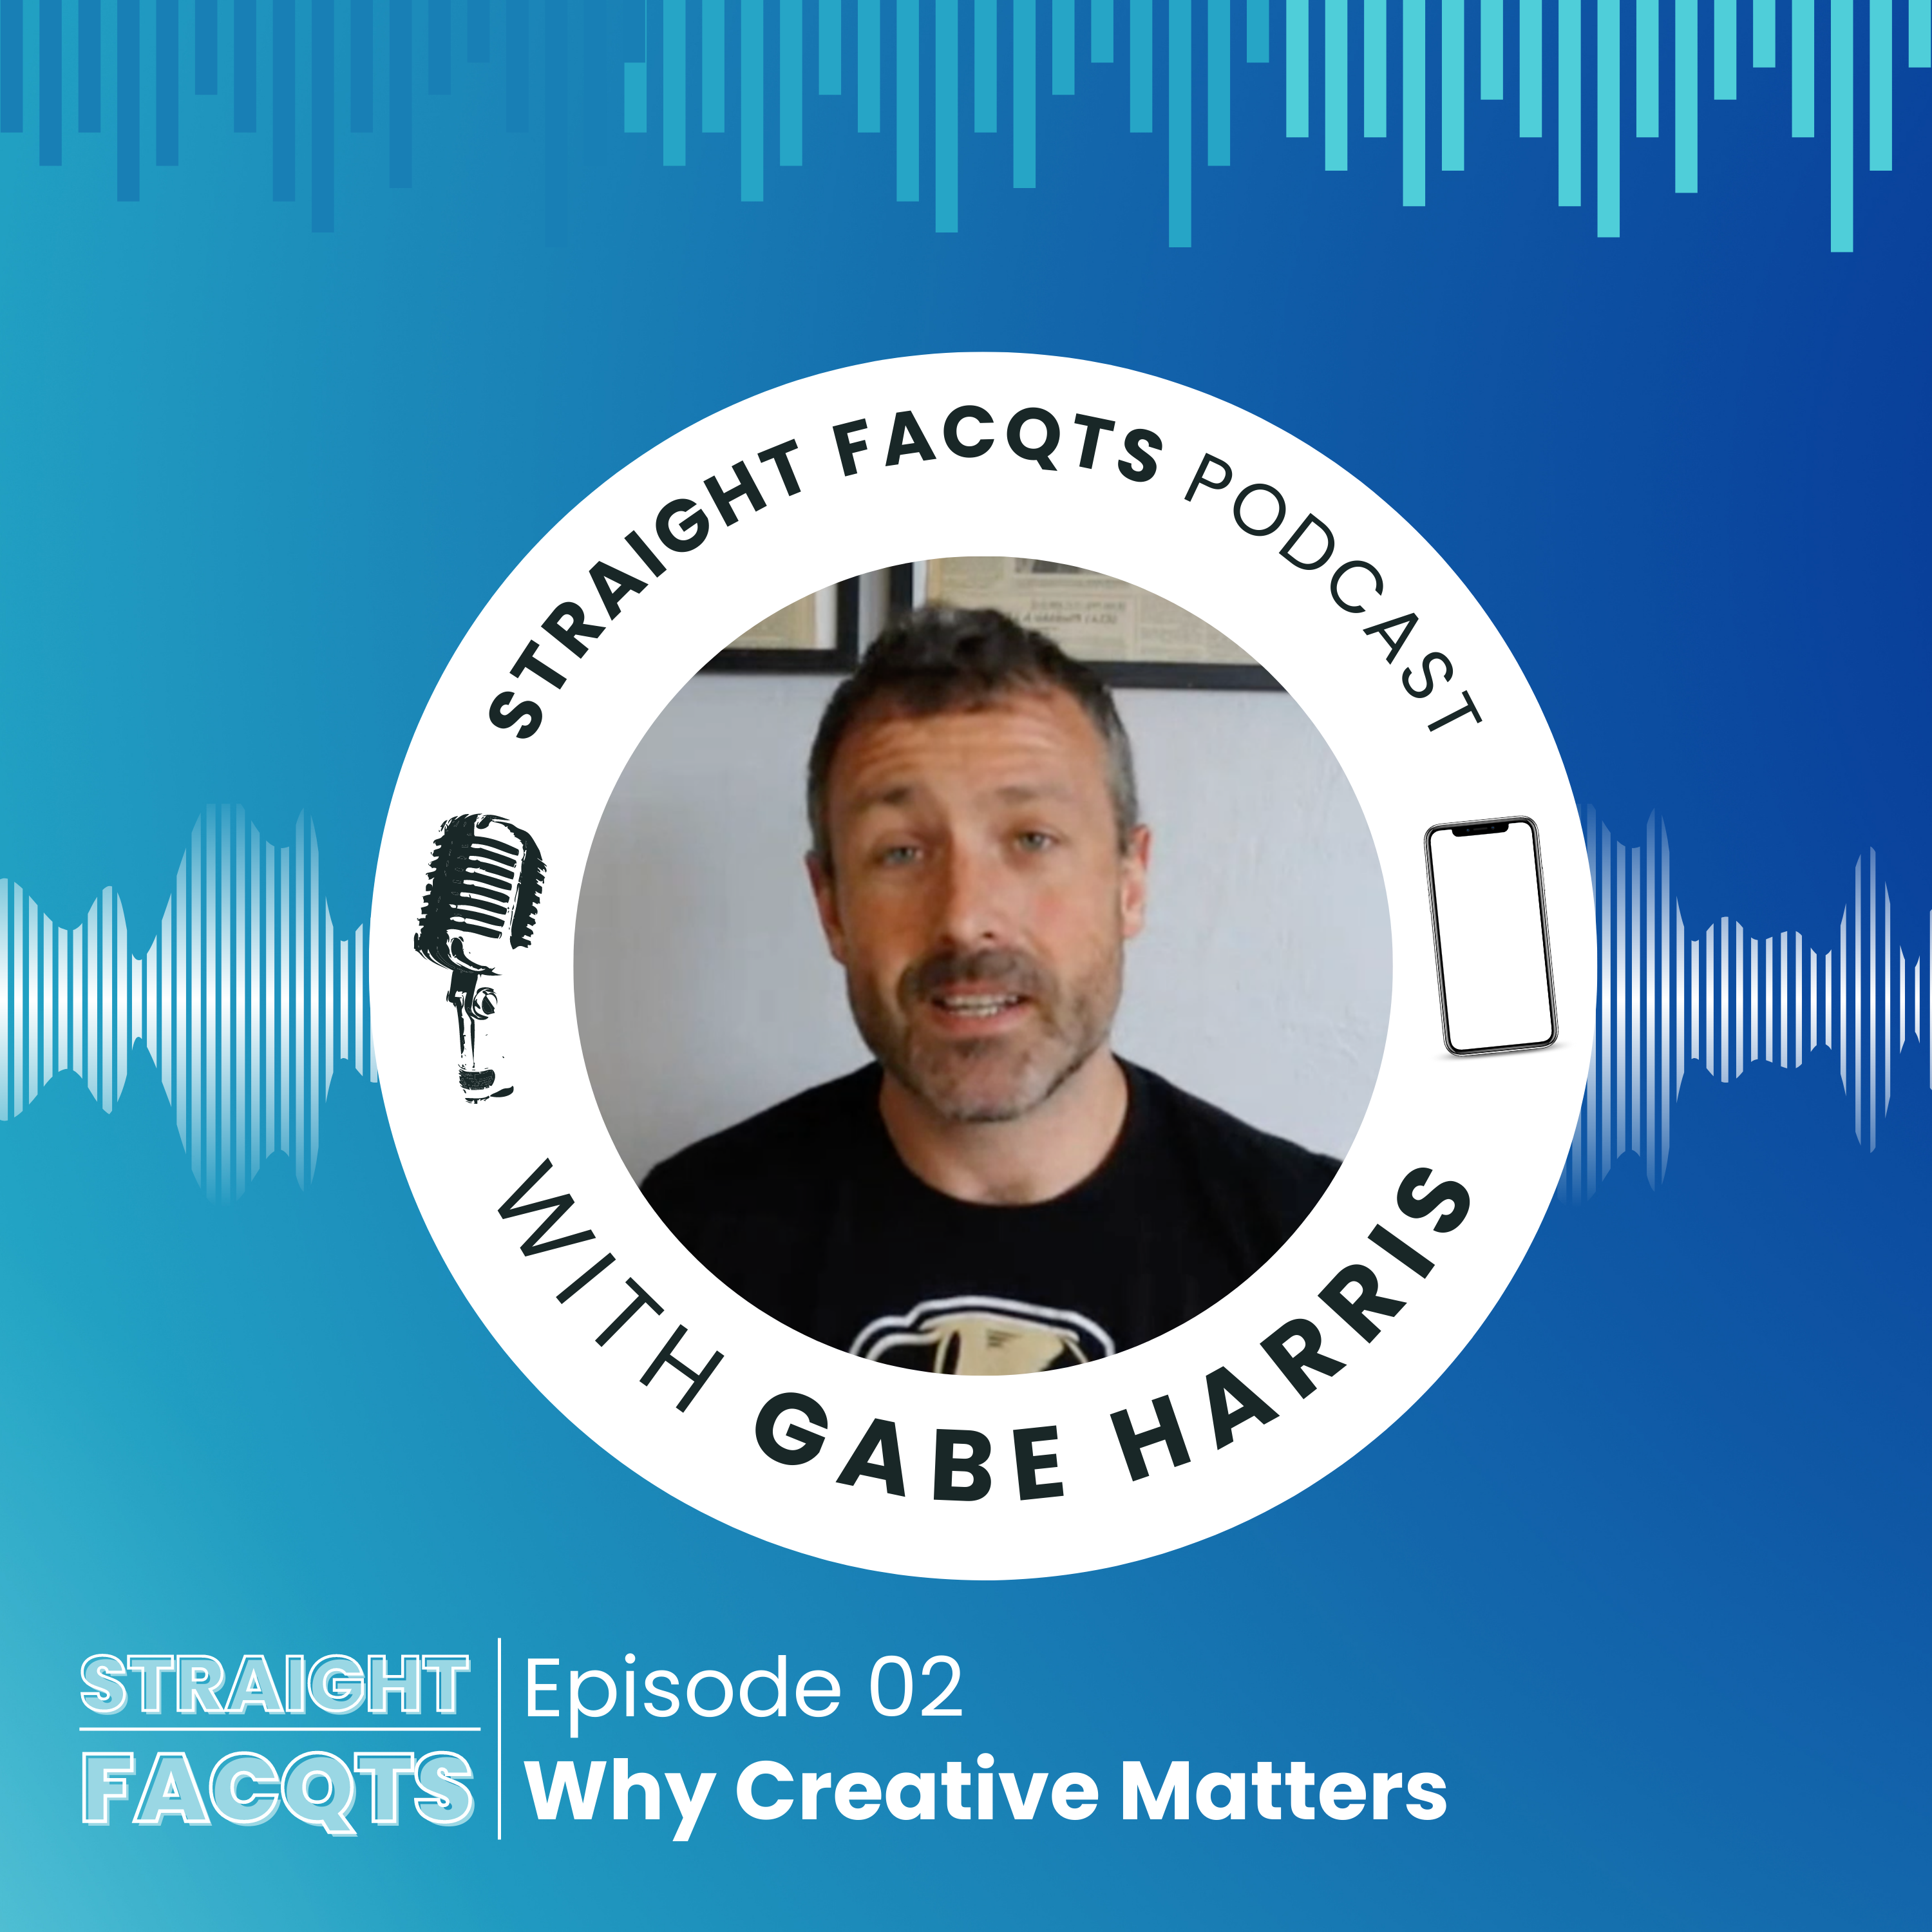 Why Creative Matters | Straight Facqts Podcast Ep. 2